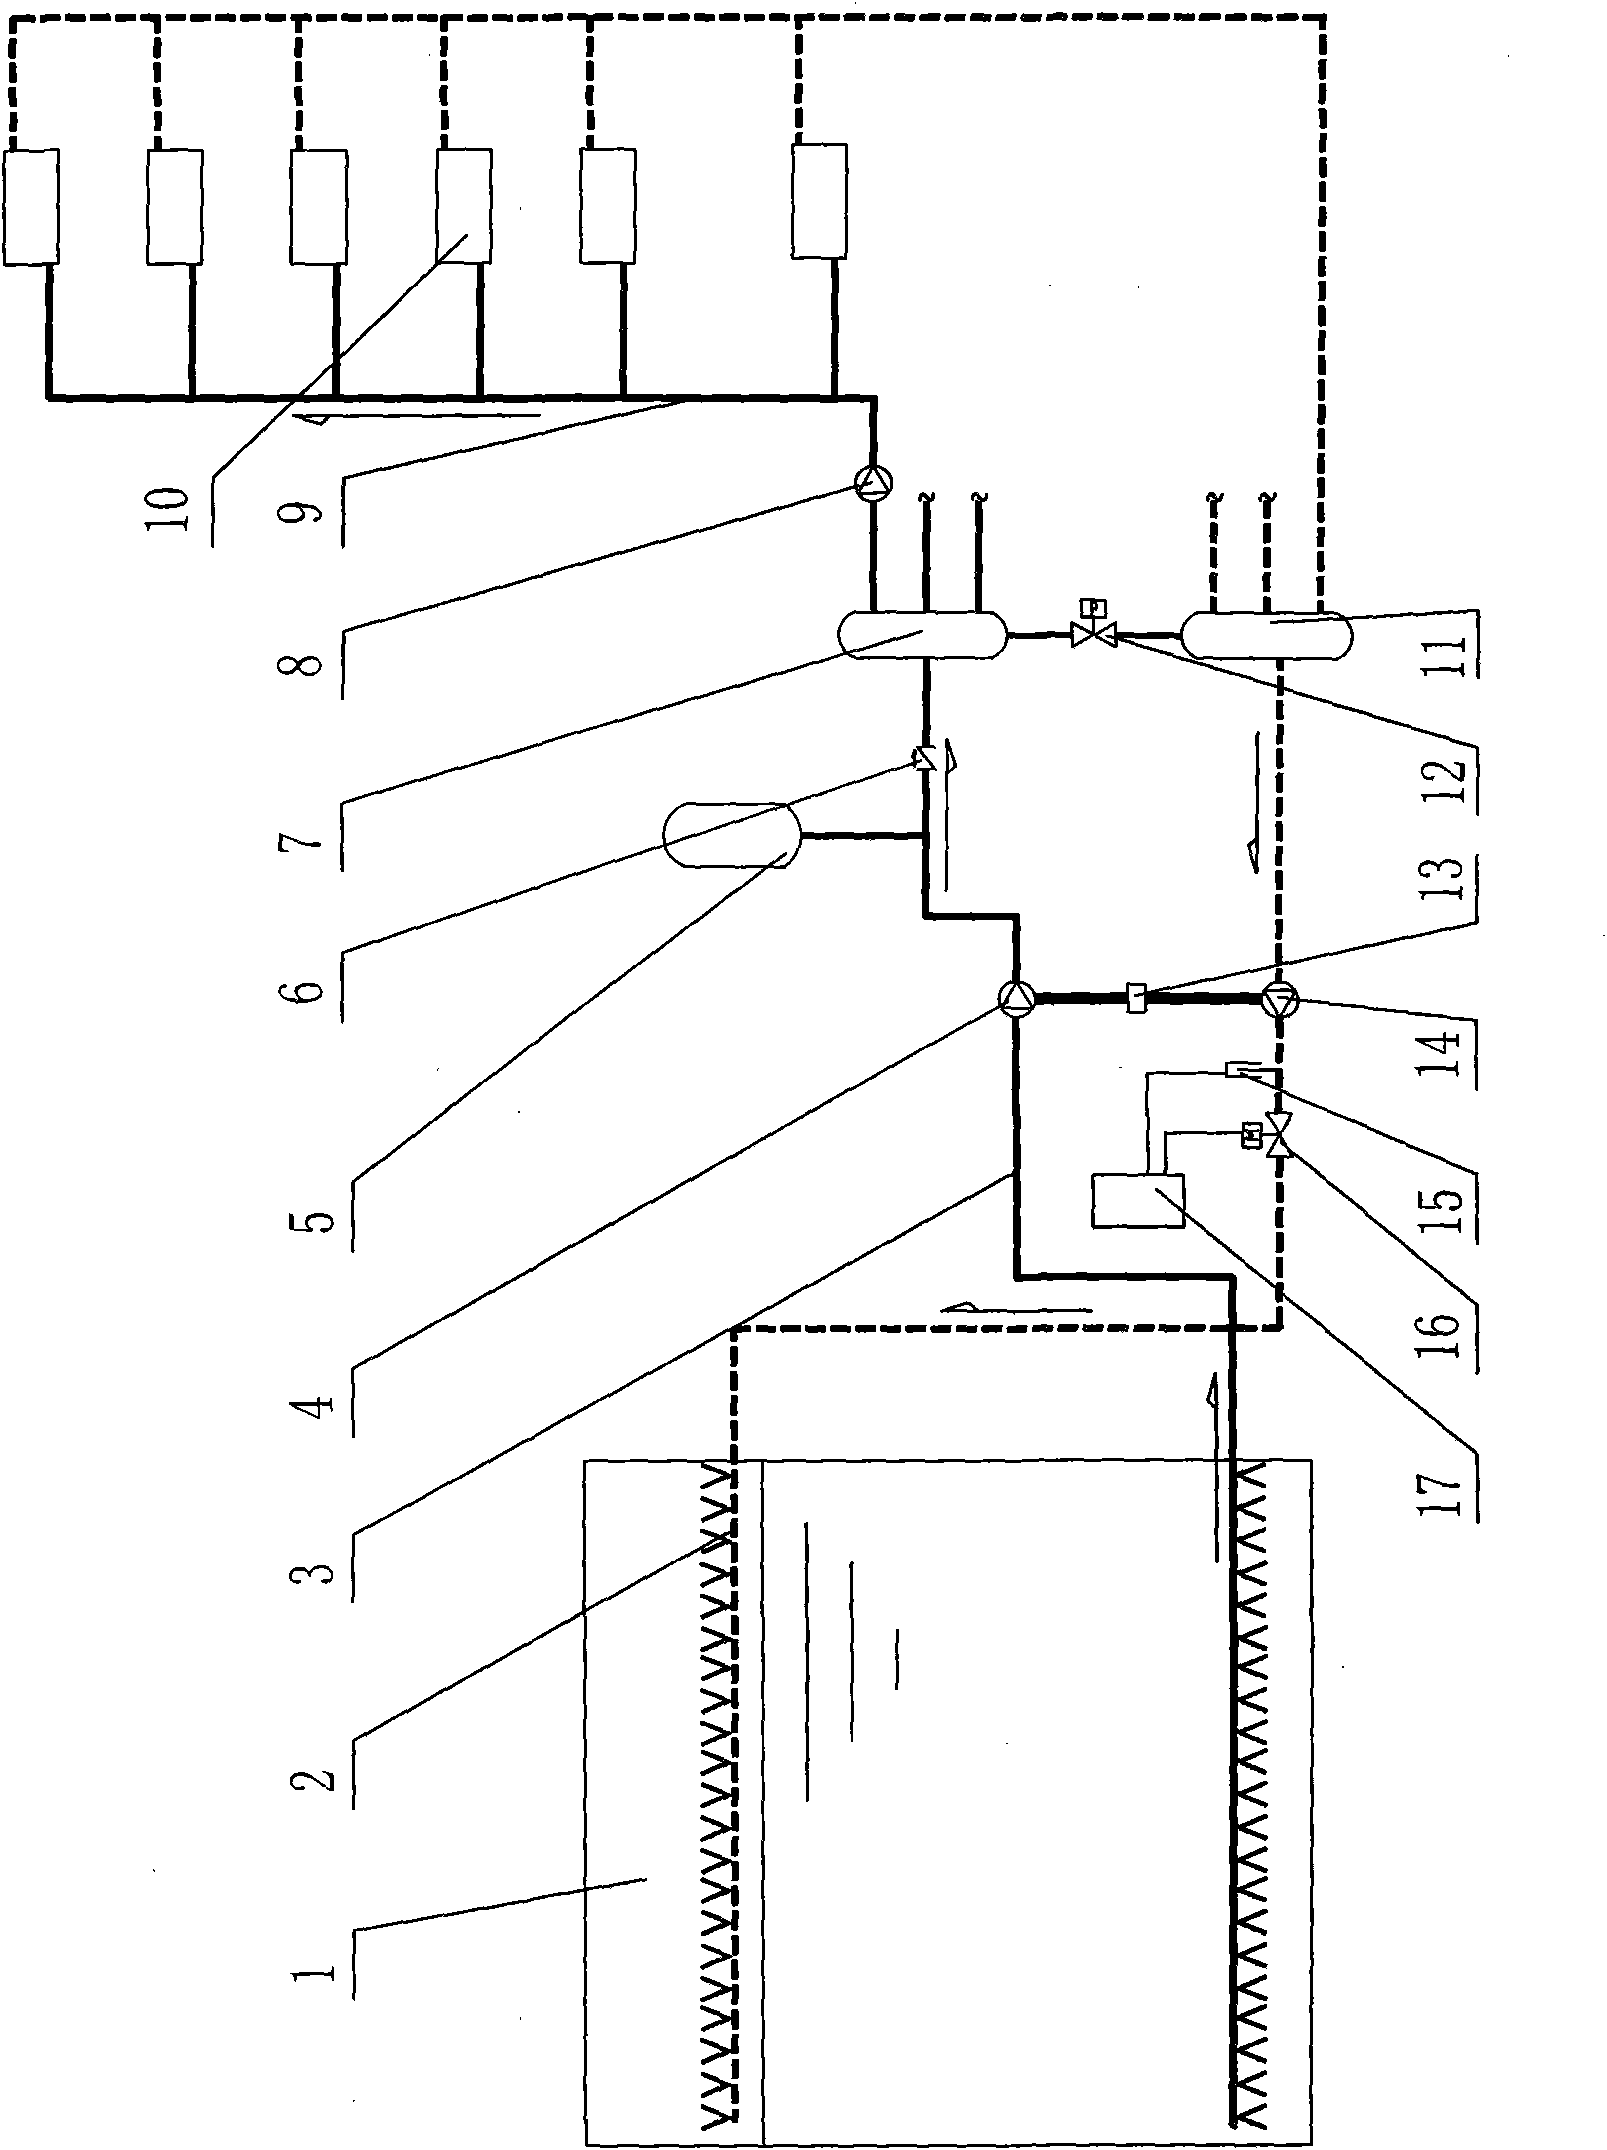 Device and method for synchronously recycling water potential energy of central air conditioning system